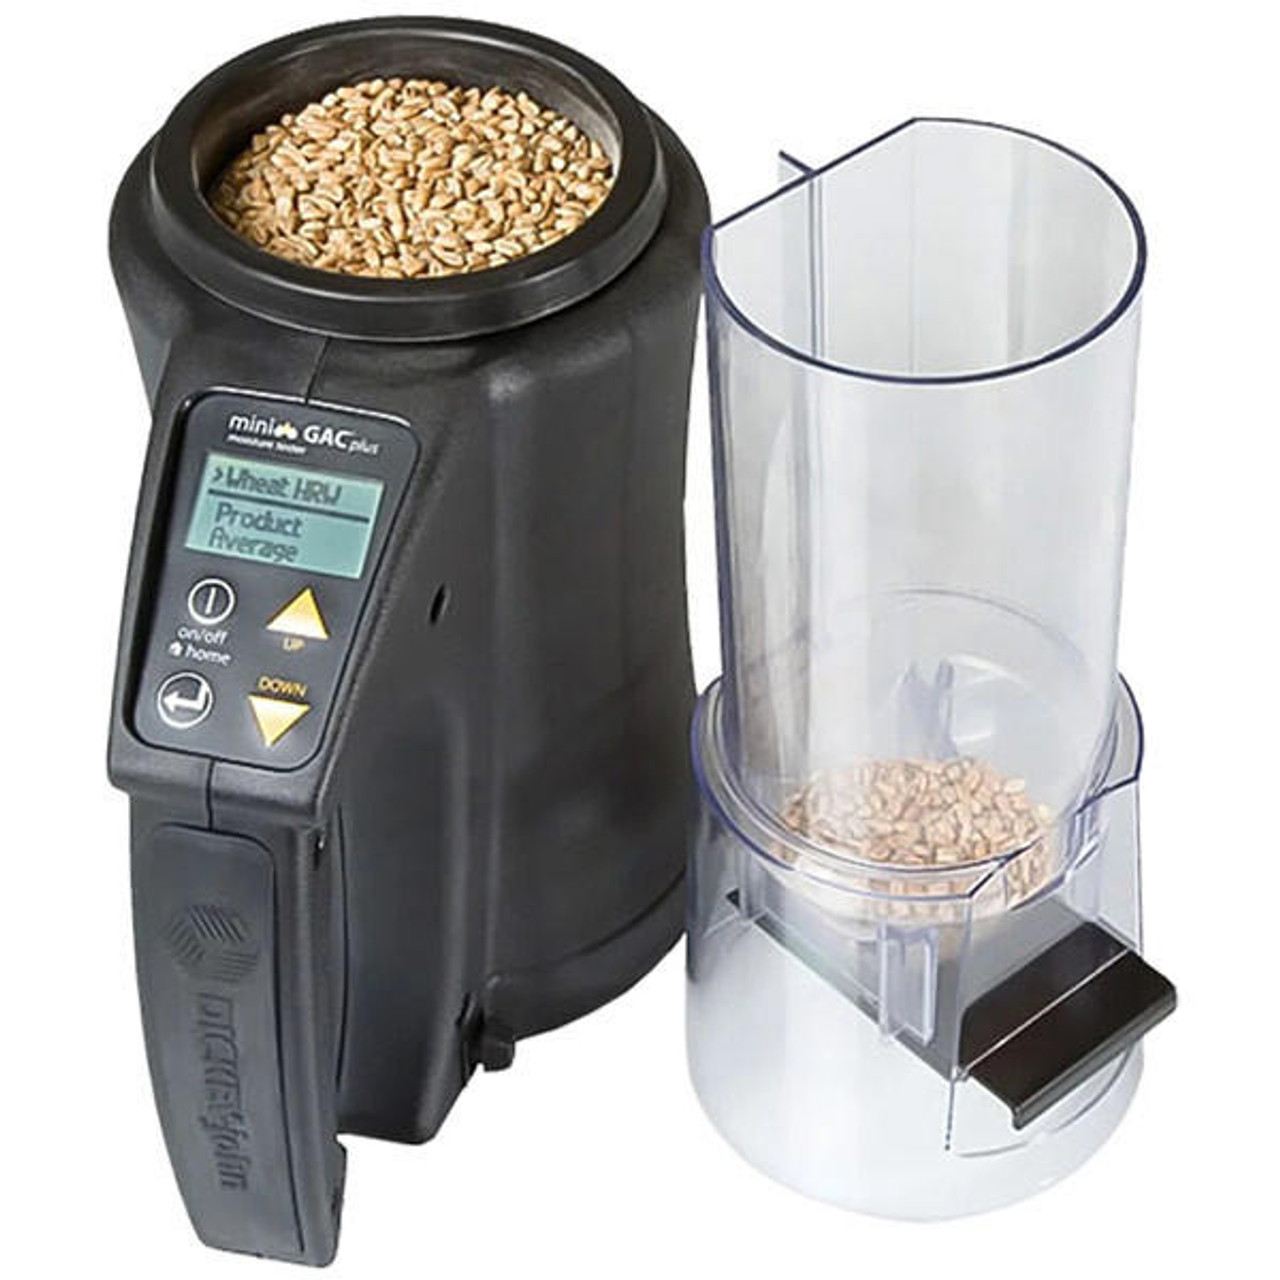 A handheld grain moisture analyzer with an internal scale and automatic temperature compensation